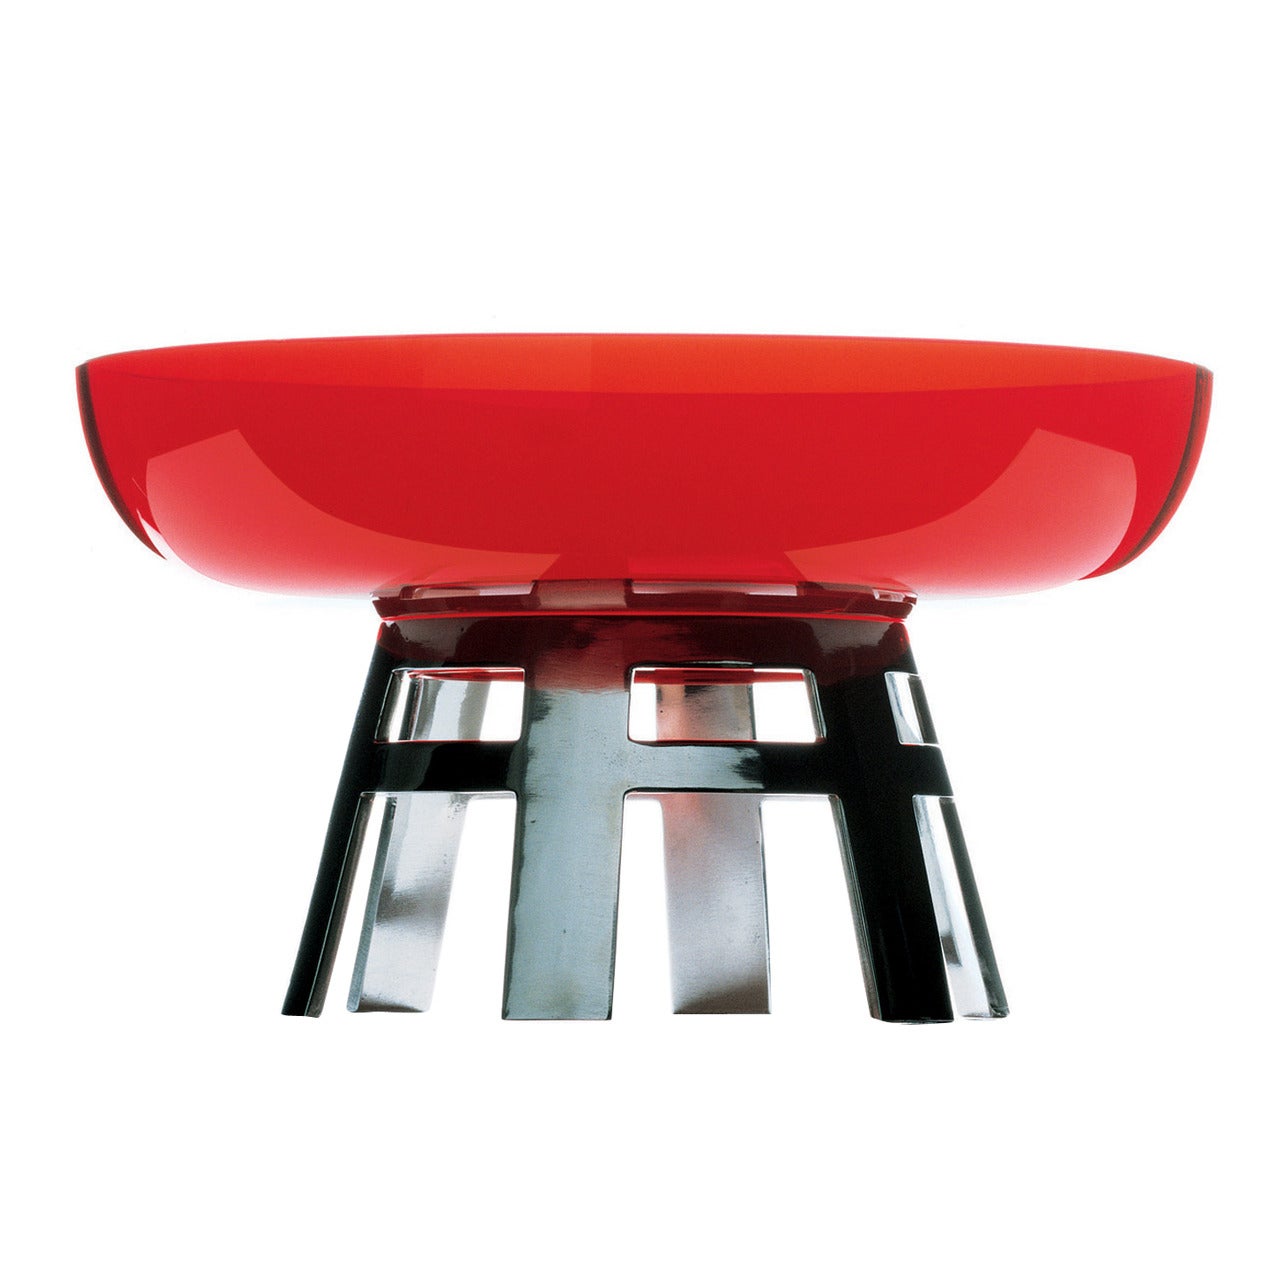 'Tavola Rossa' Centre Piece by Ettore Sottsass For Sale